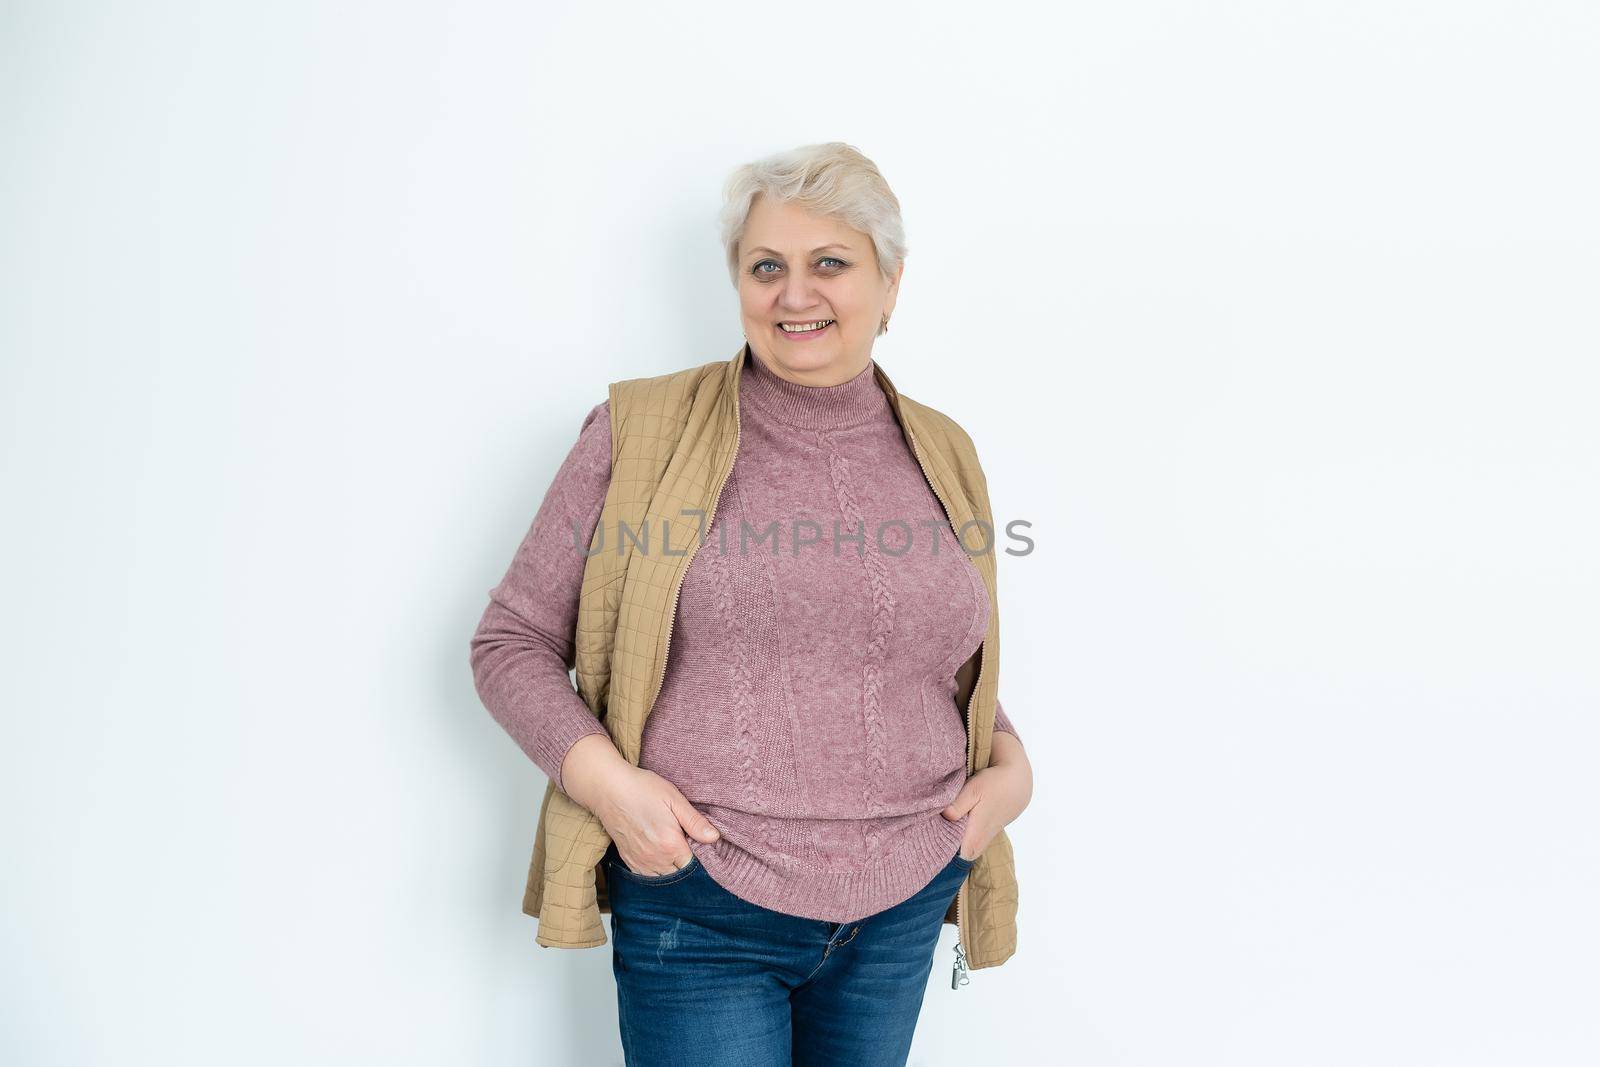 Smiling happy woman. Isolated over white background by Andelov13